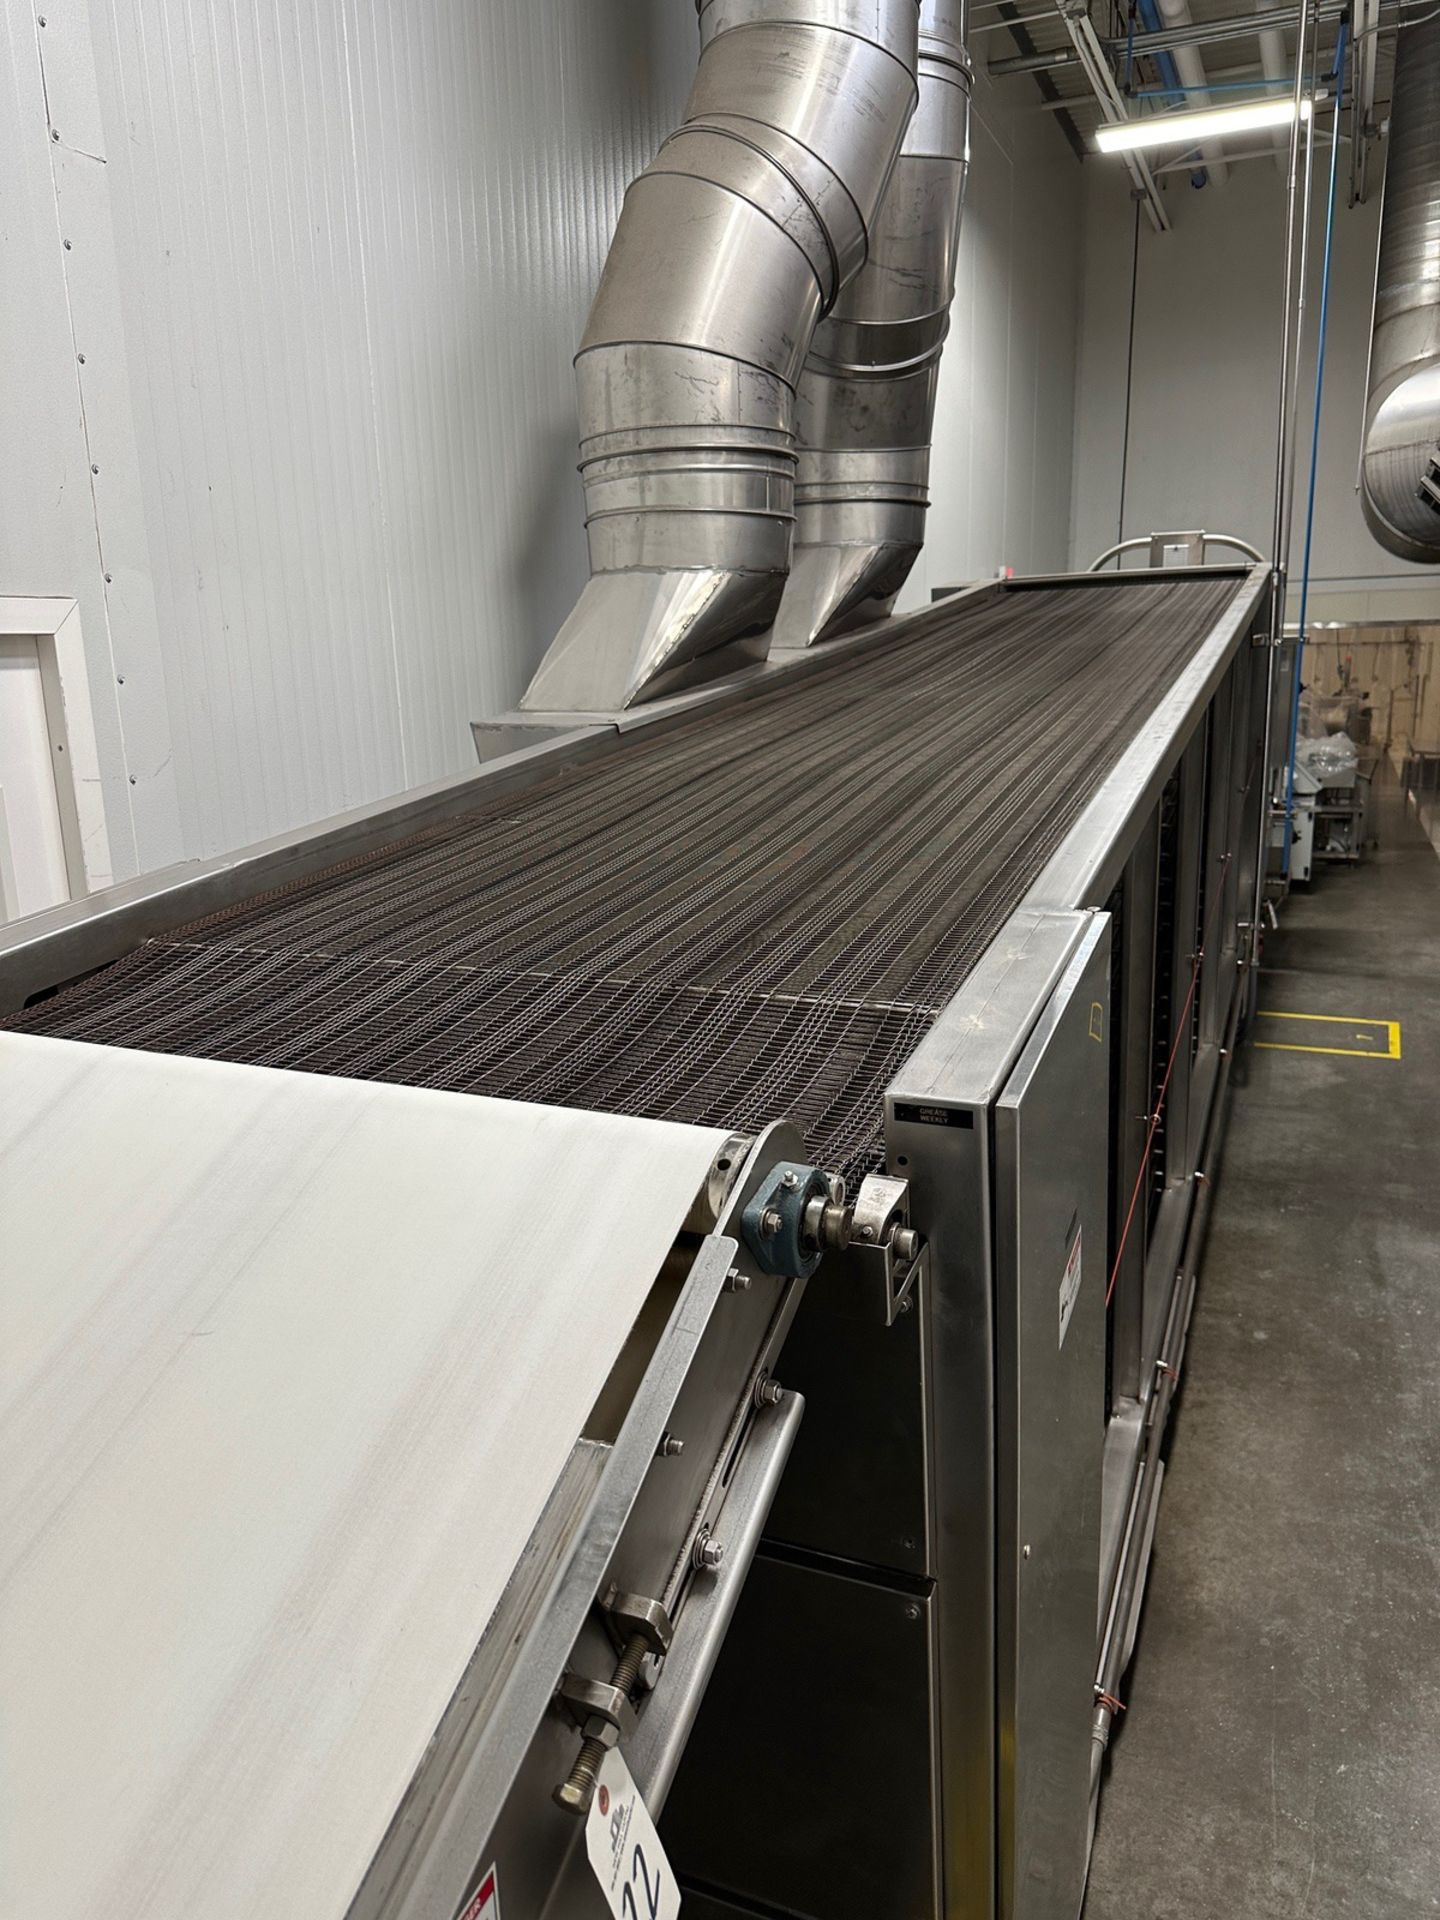 2019 AM Manufacturing Chain Belt Cooling Conveyor (Approx. 48" x 22') | Rig Fee $2500 - Image 2 of 7